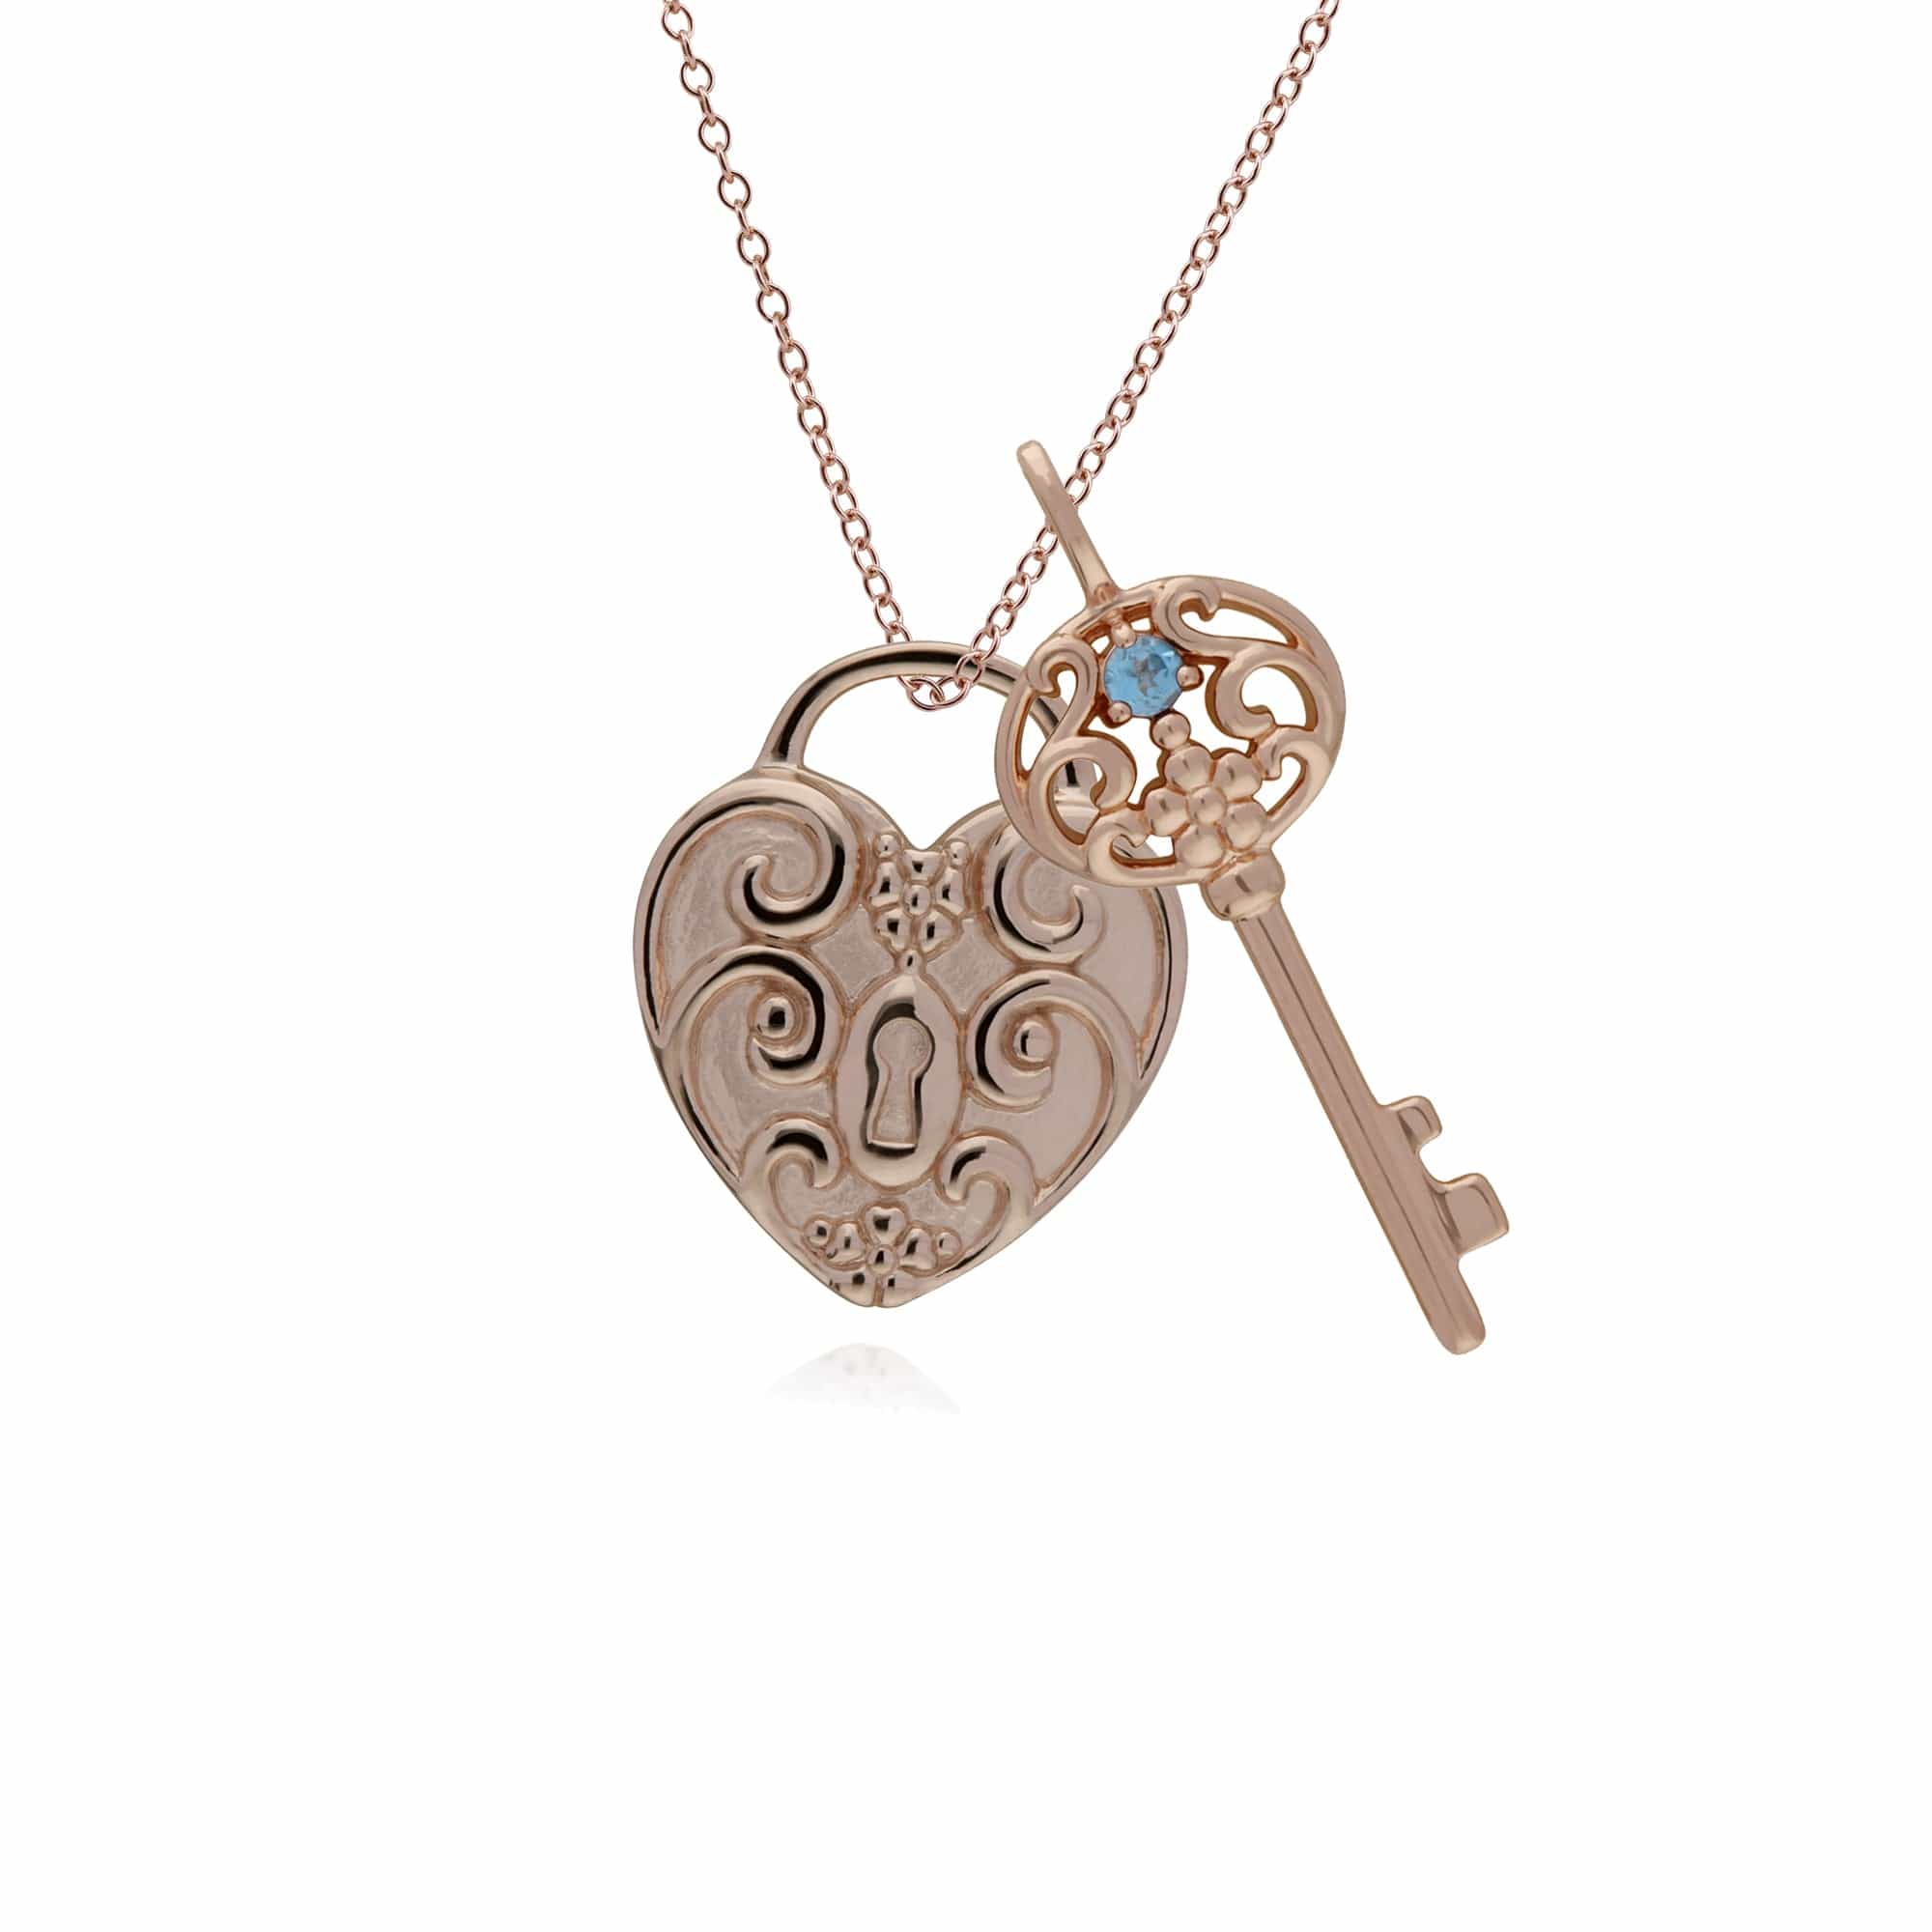 270P026706925-270P026501925 Classic Swirl Heart Lock Pendant & Blue Topaz Big Key Charm in Rose Gold Plated 925 Sterling Silver 1